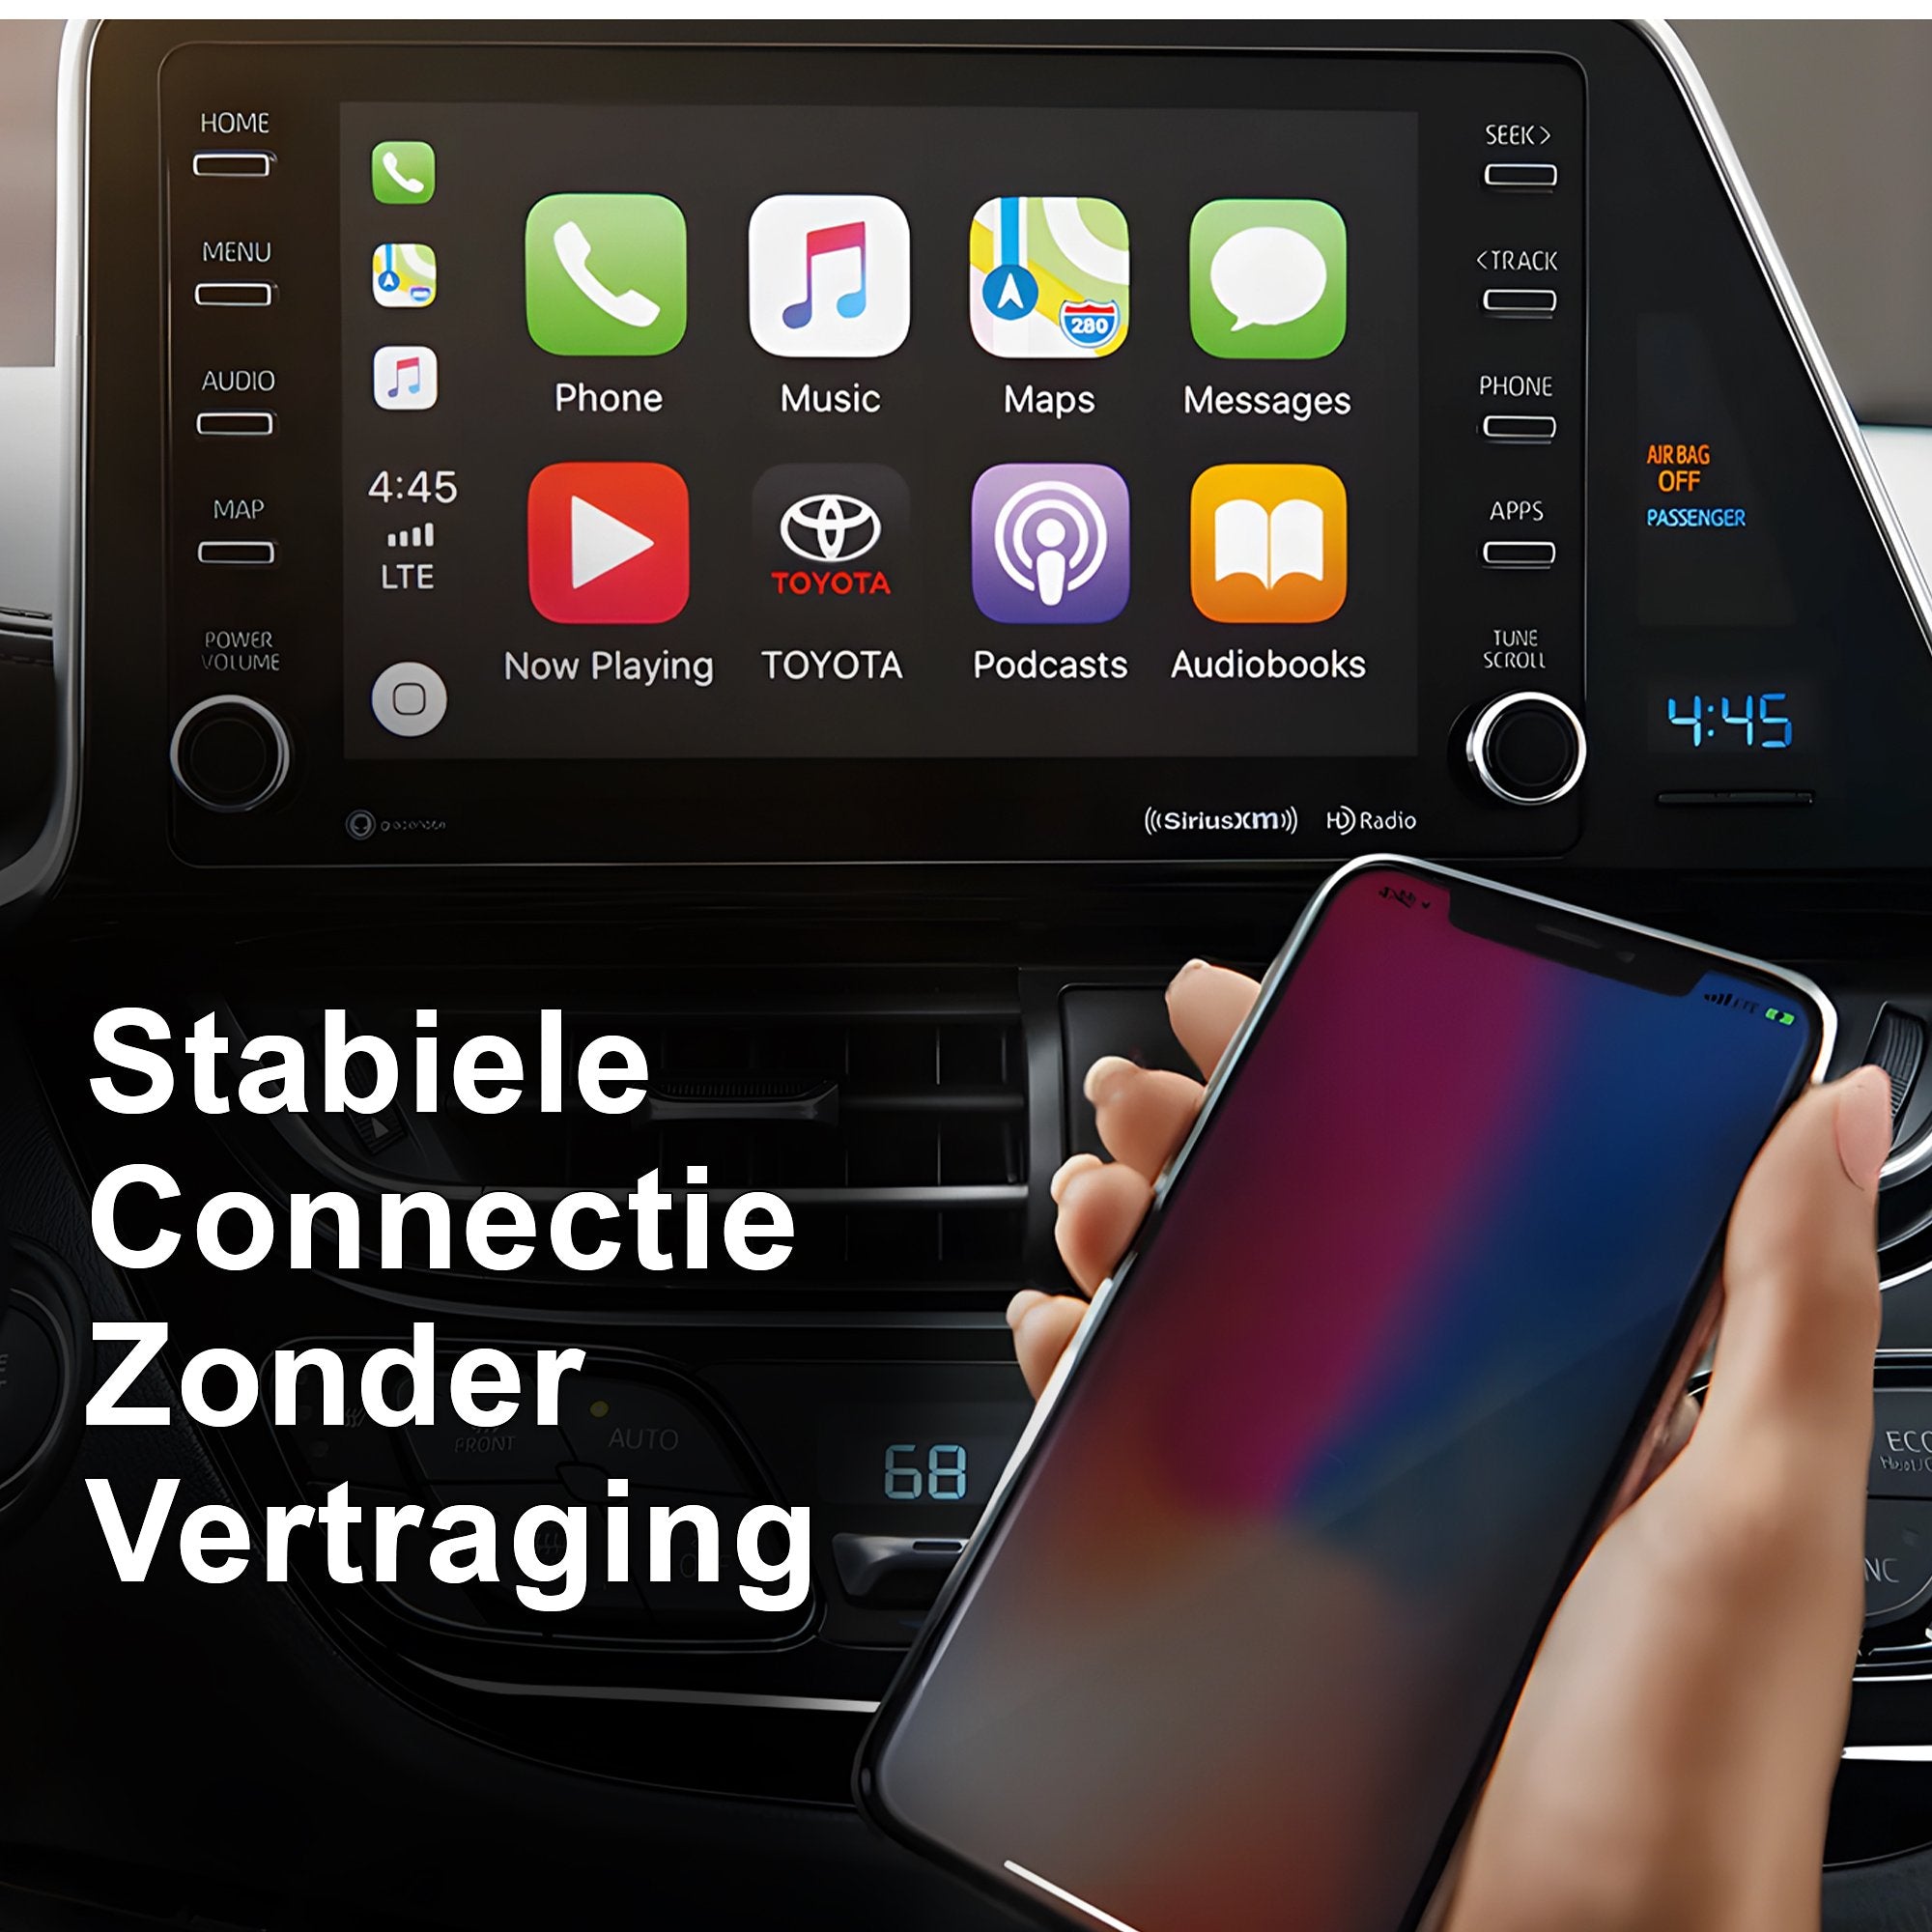 Quality4Less™ - Luxury Adapter for Carplay - Wirelessly connect with Apple Carplay - 2024 Model